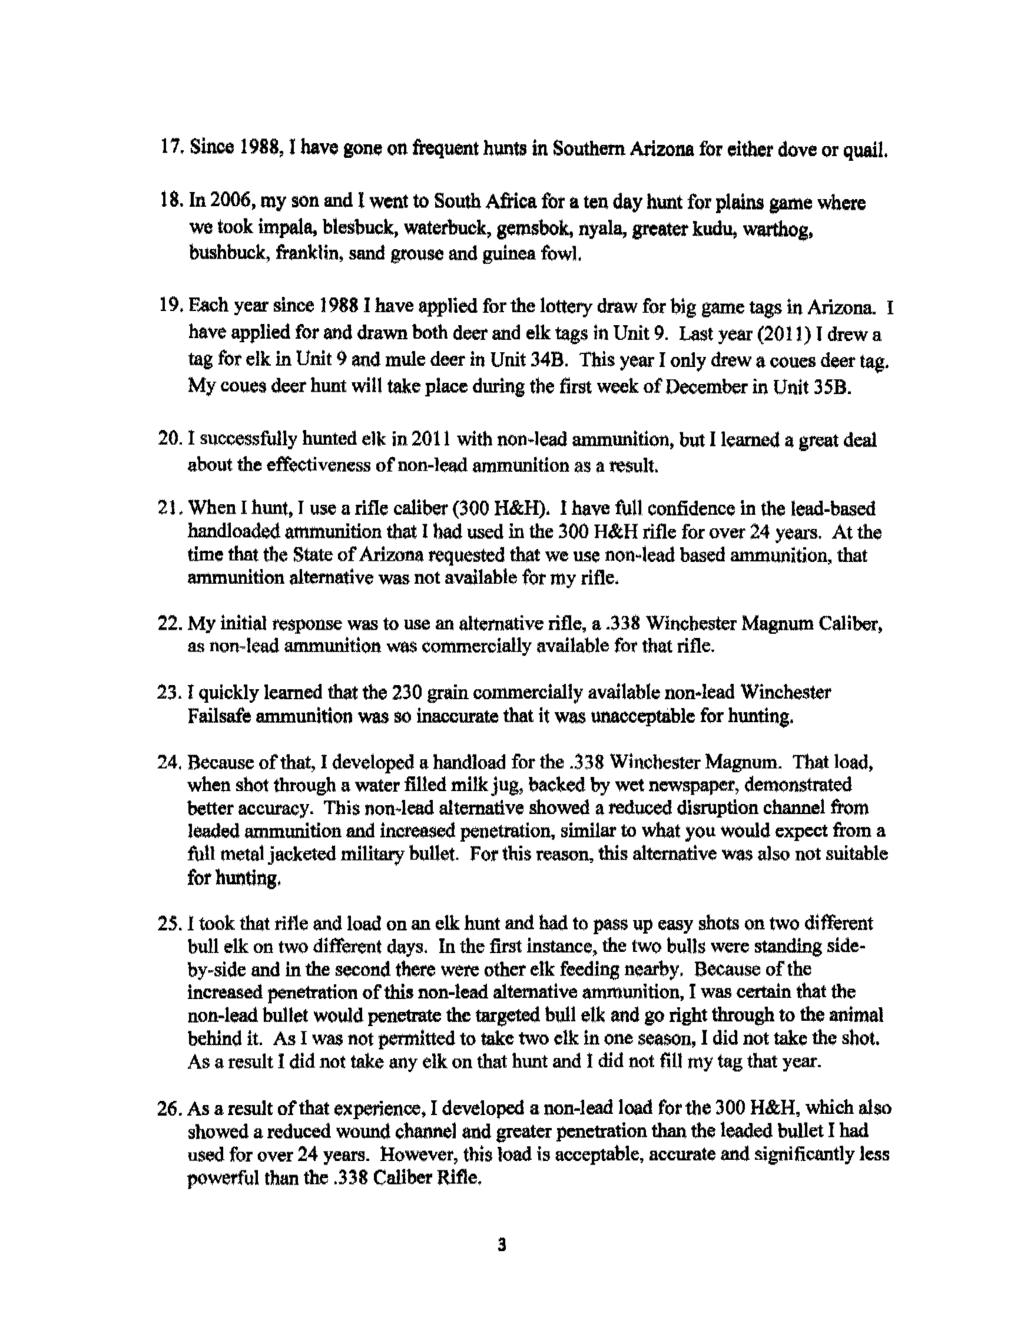 Case 3:12-cv-08176-SMM Document 37 Filed 11/21/12 Page 3 of 5 17. Since 1988, I have gone on frequent hunts in Southern Arizona for either dove or quail. 18.